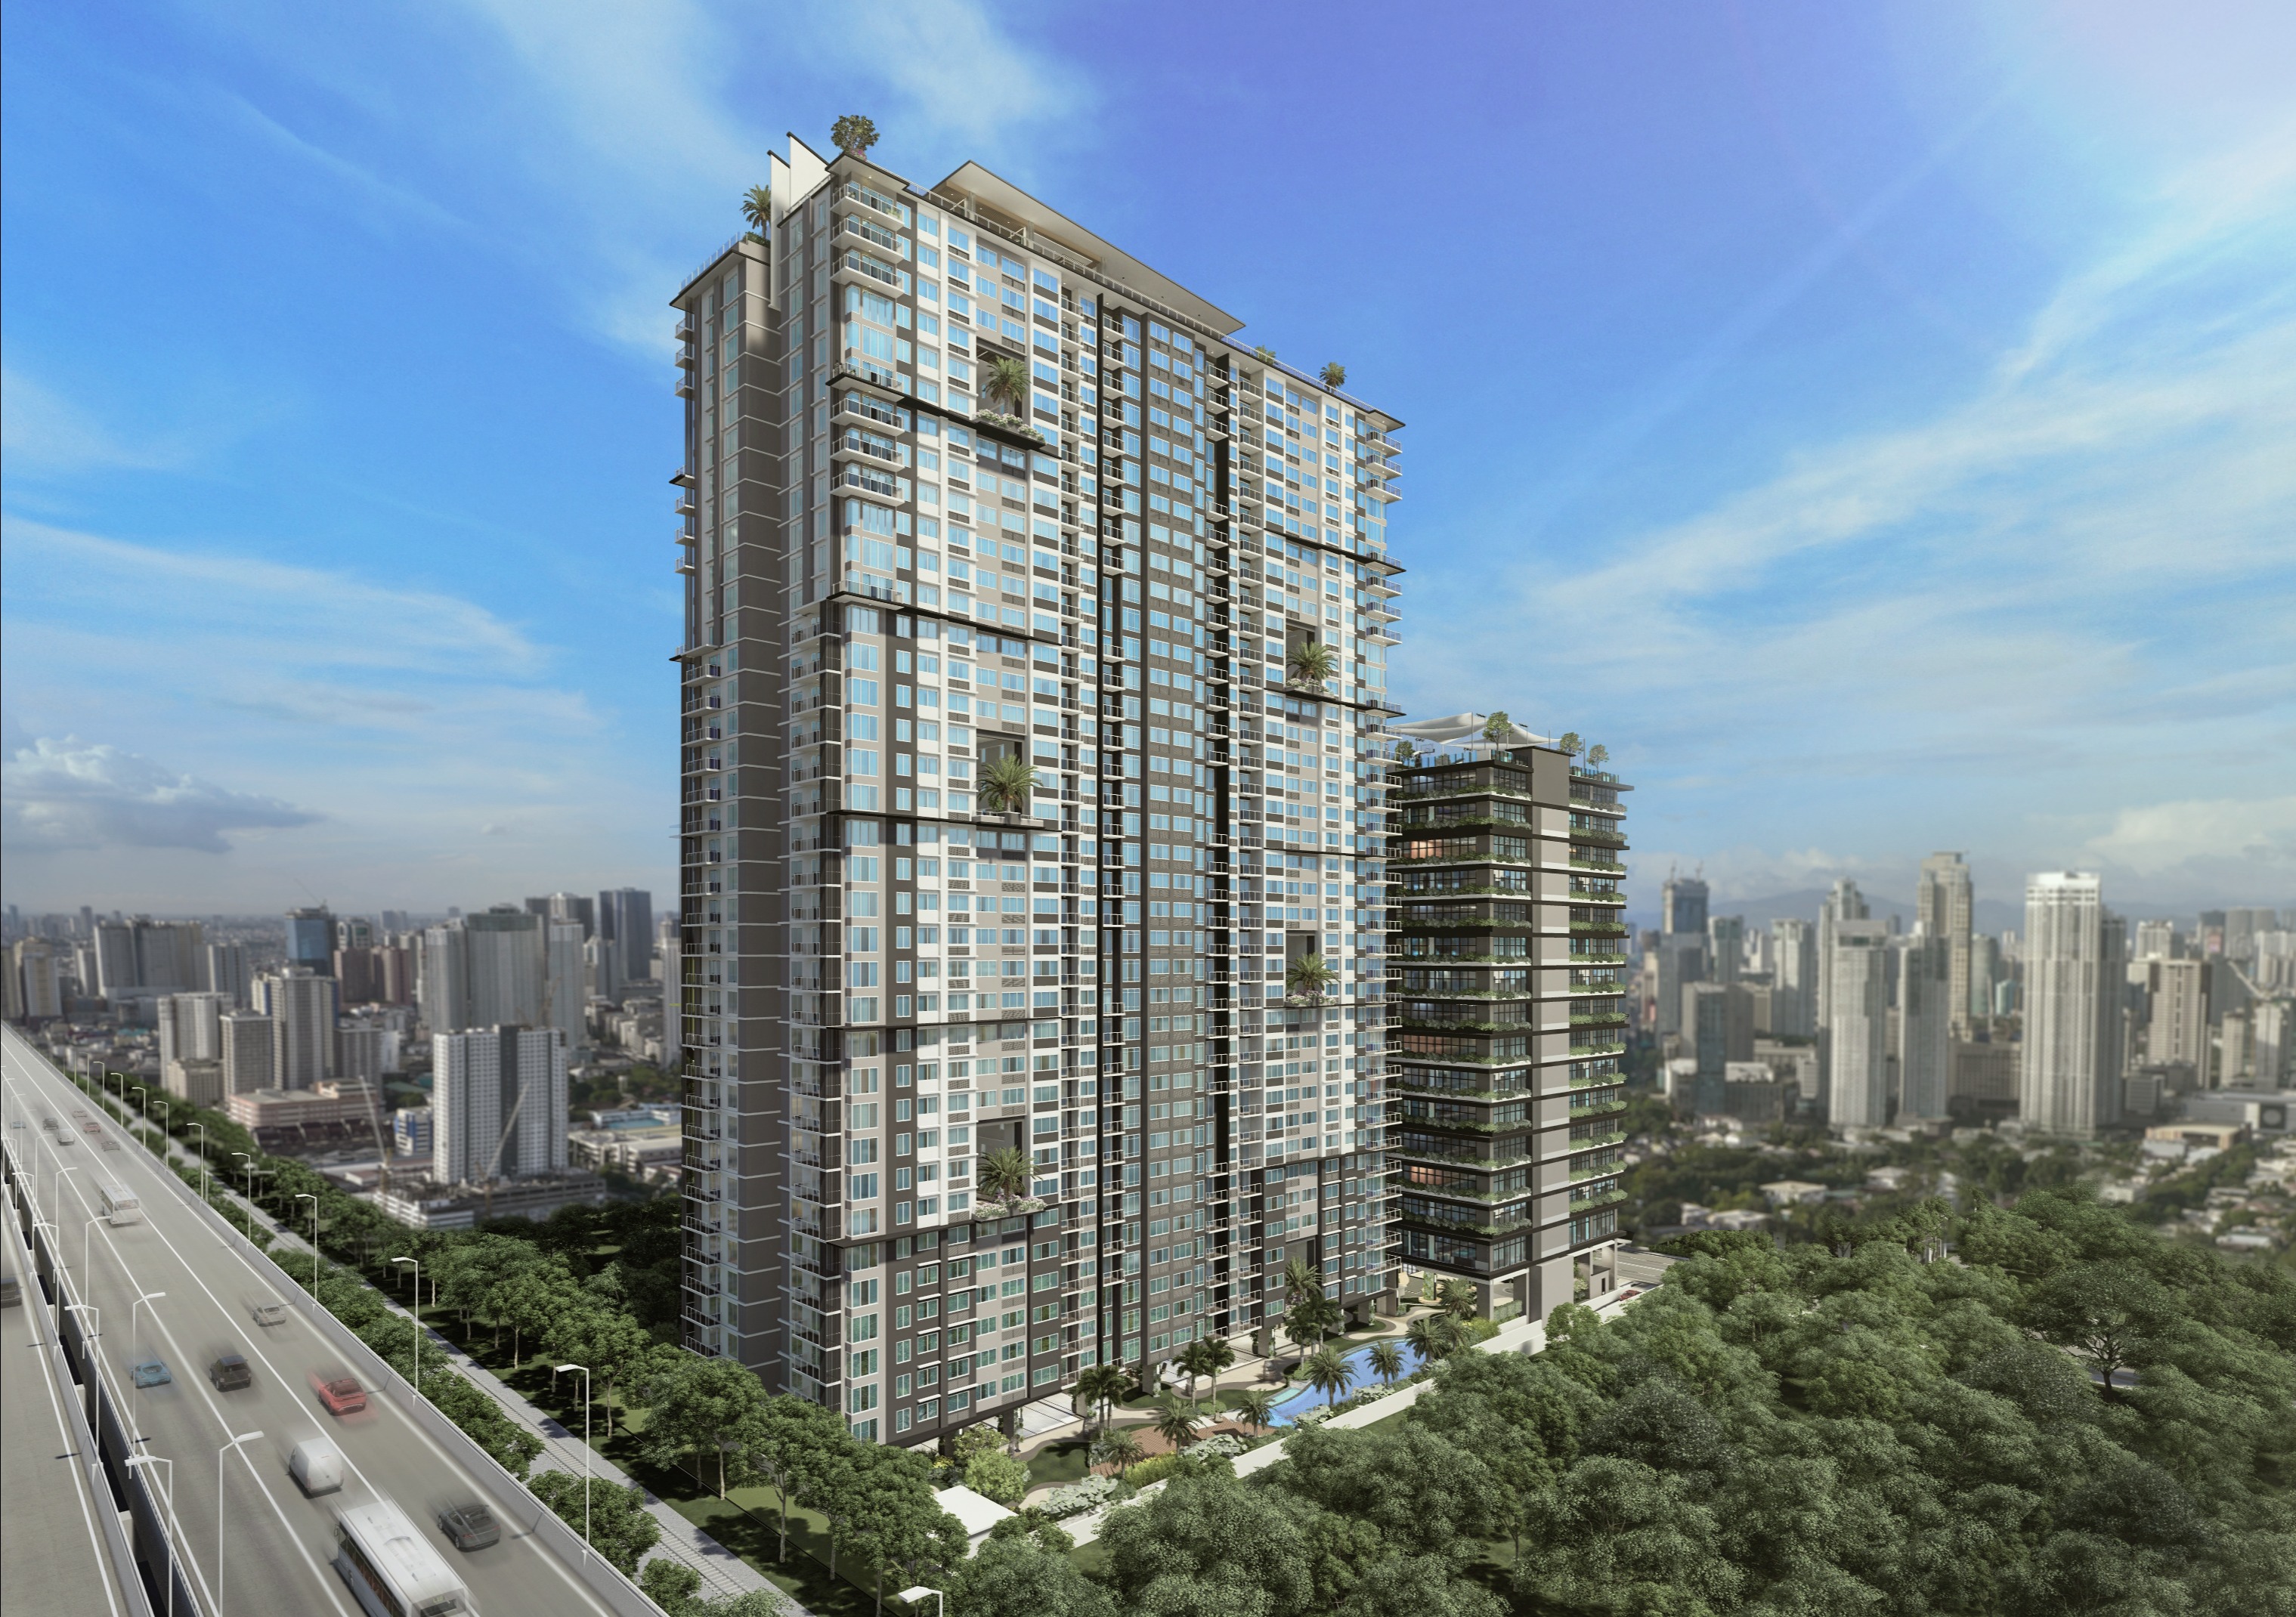 dmci-homes-unveils-fortis-residences-showroom-in-makati-1715668254937